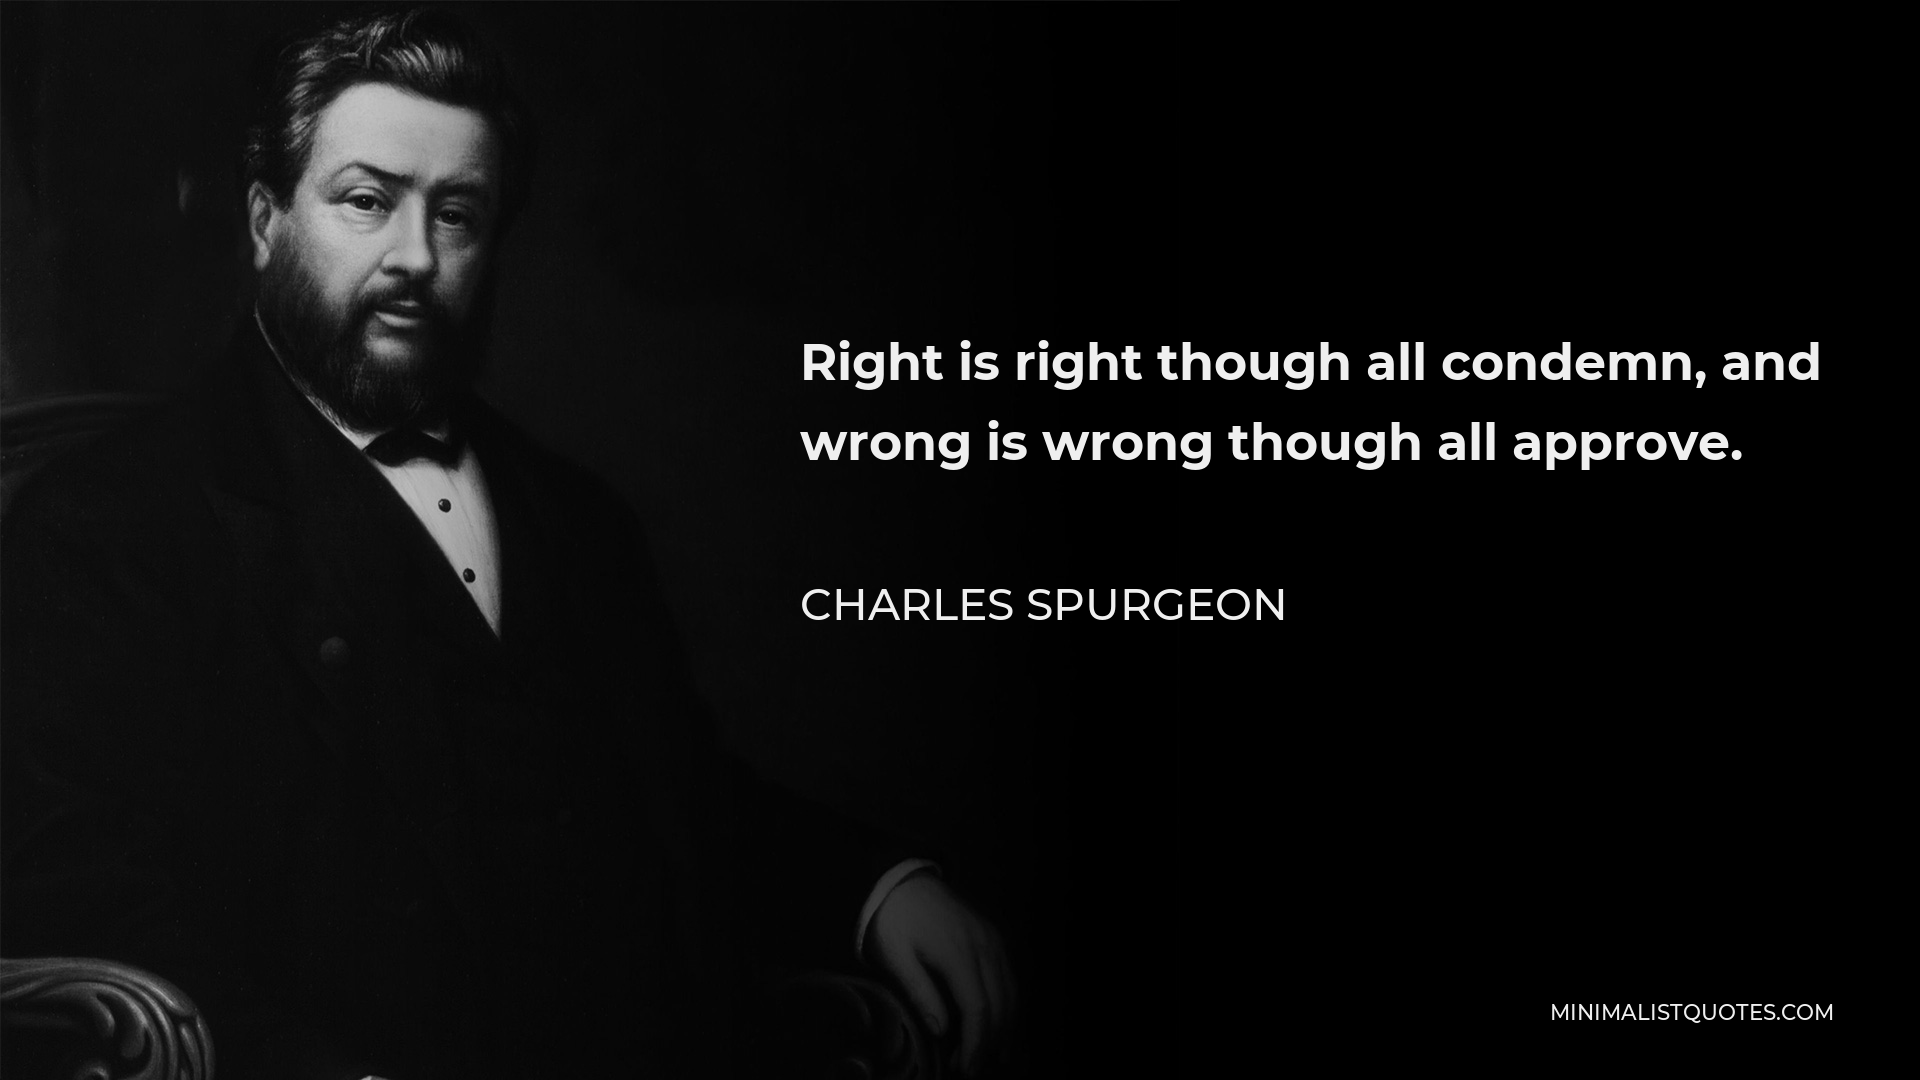 Charles Spurgeon Quote - Right is right though all condemn, and wrong is wrong though all approve.